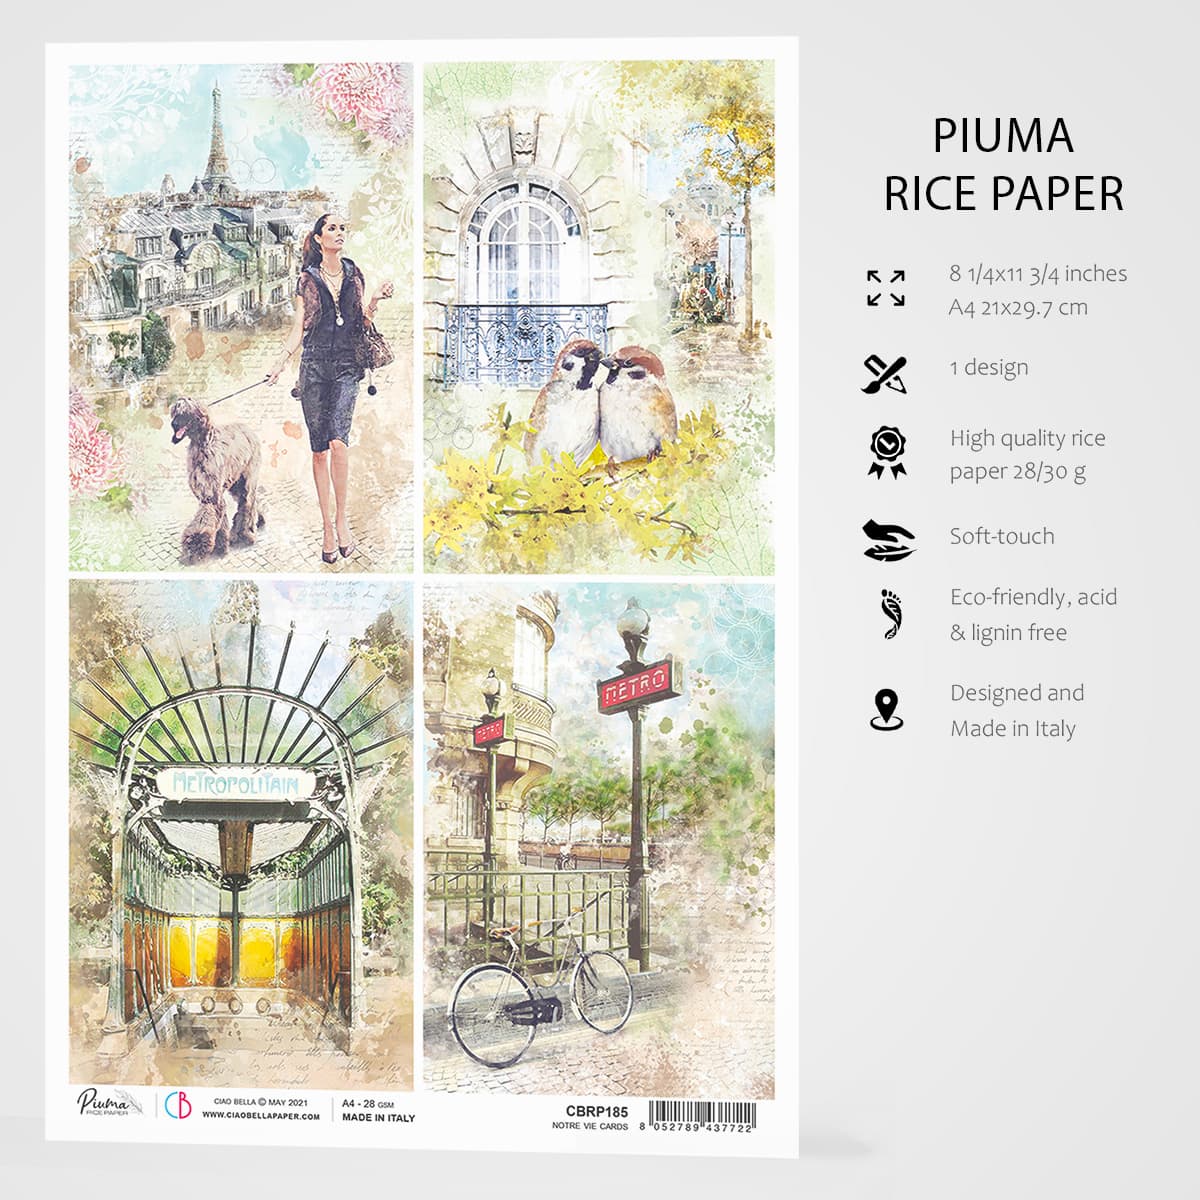 Premium Quality Rice Paper for Painting